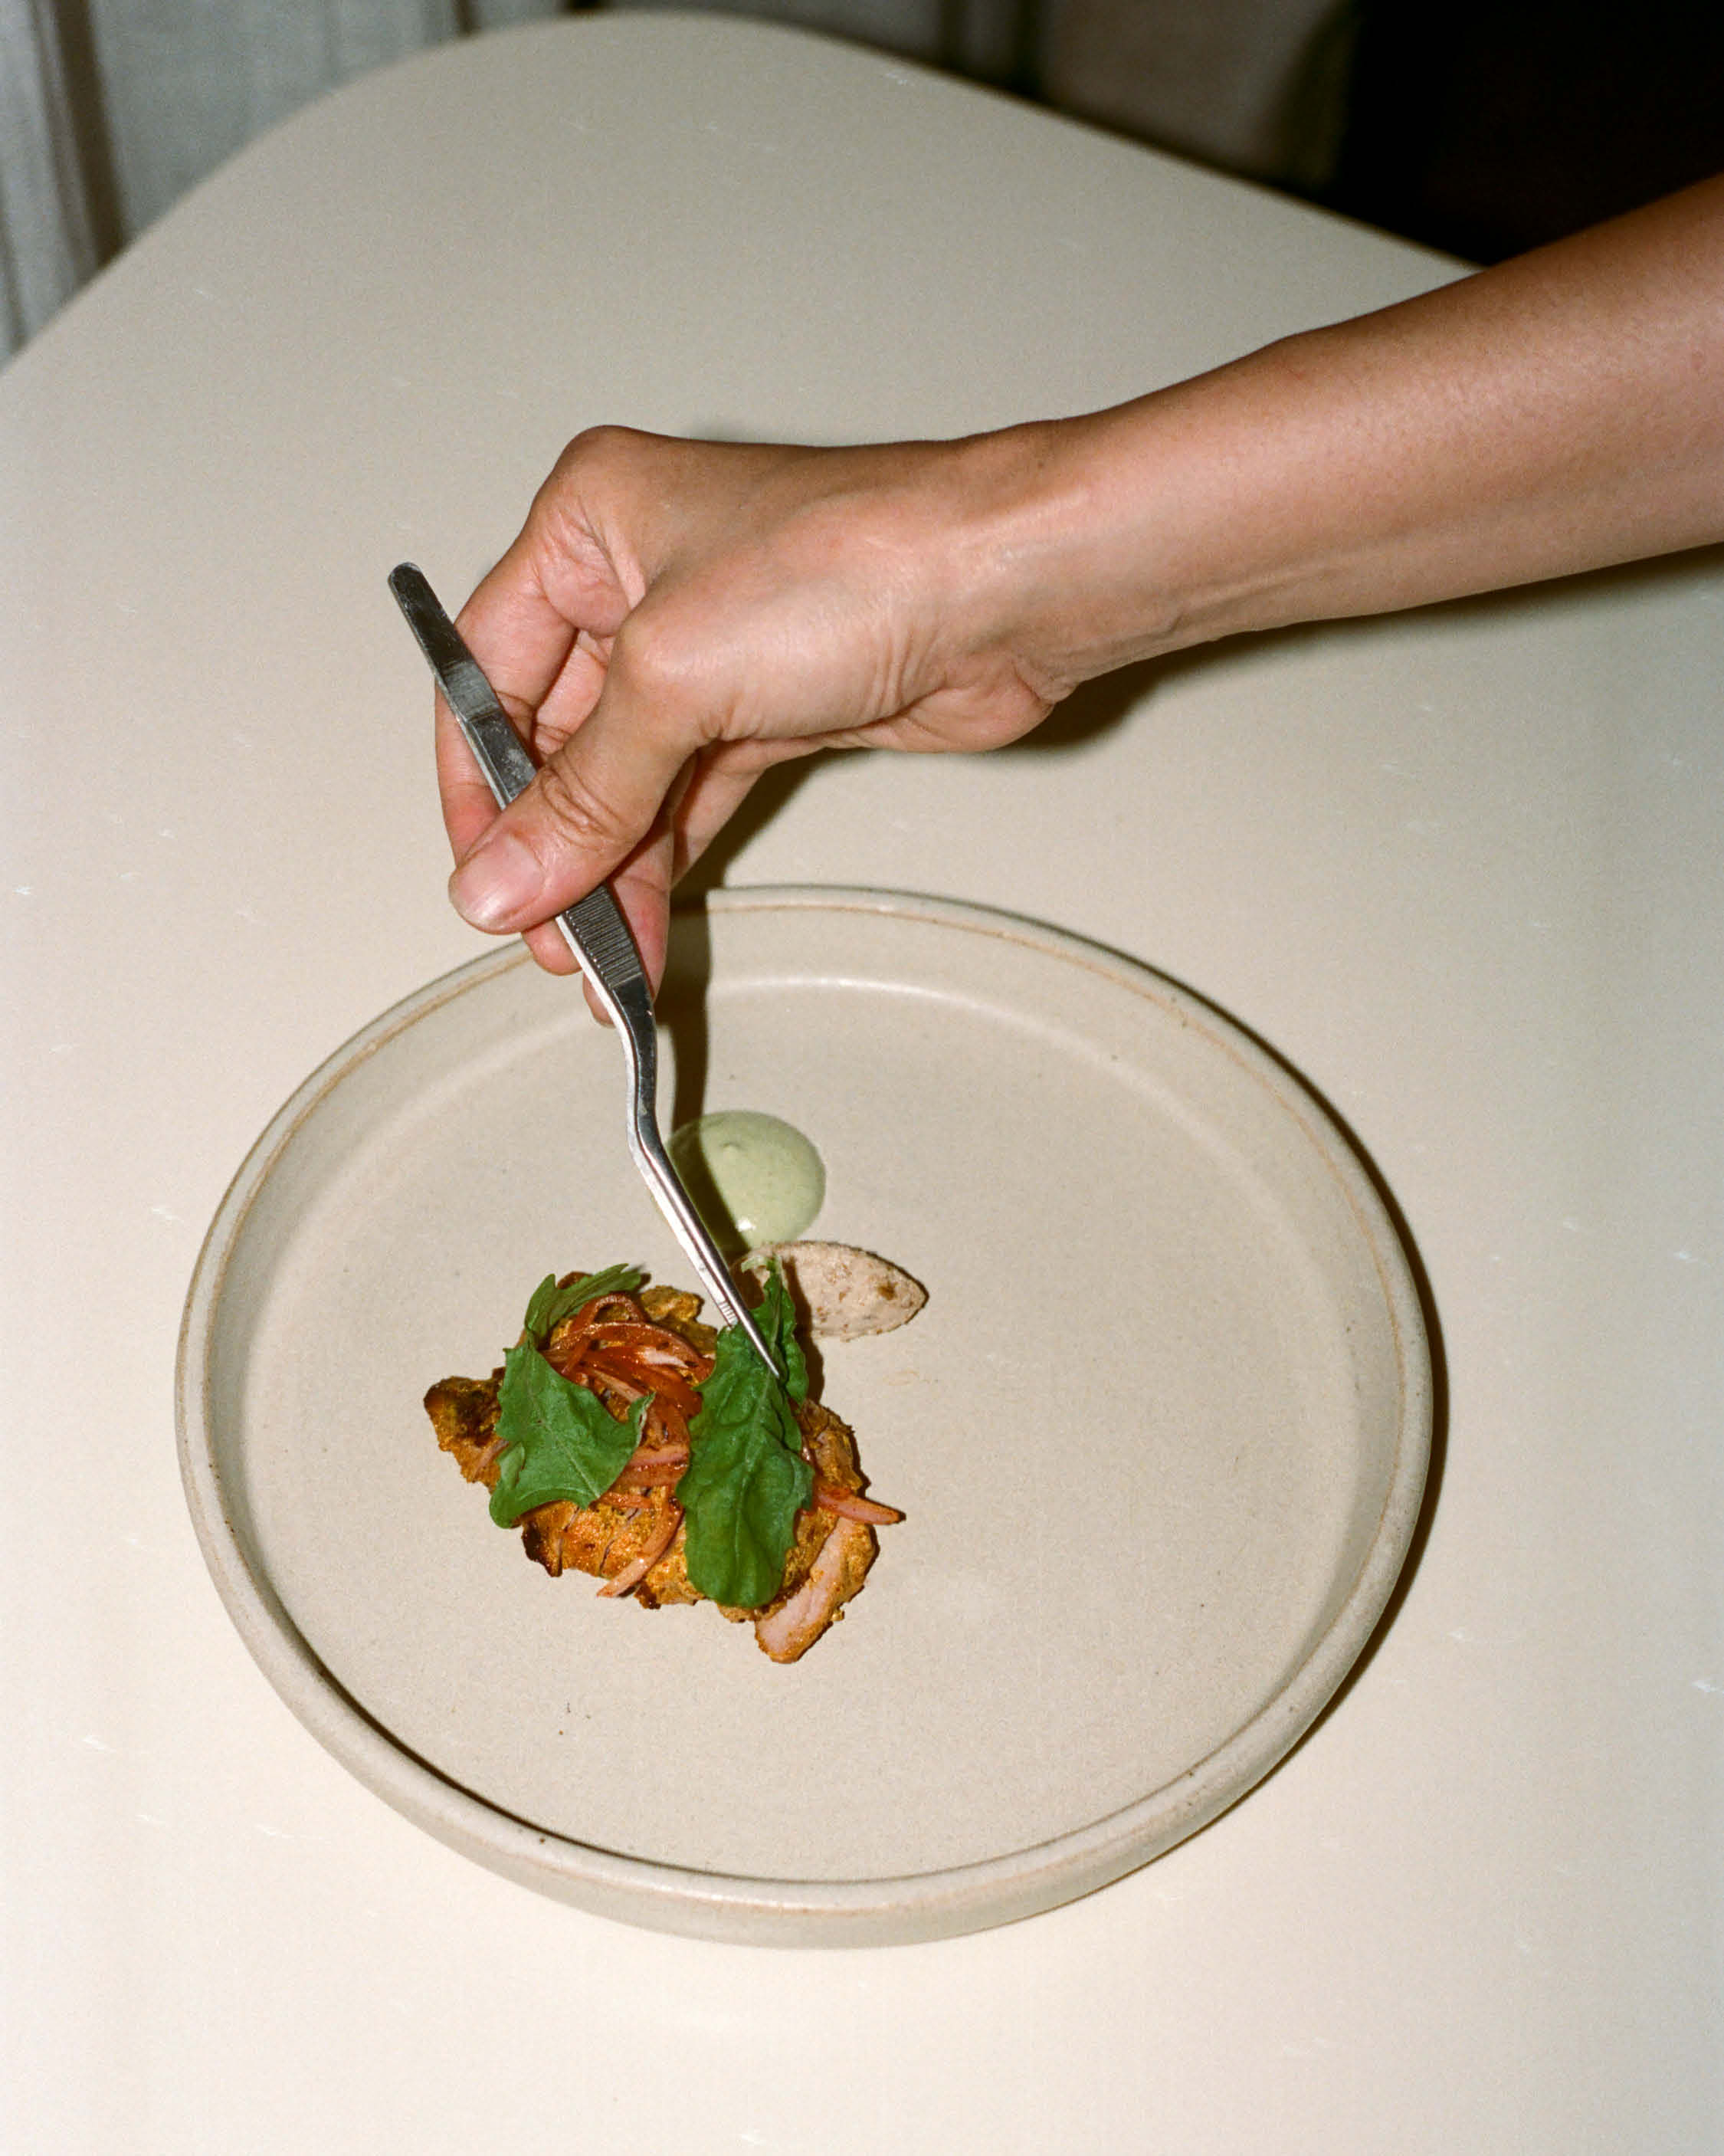 Plating up food on a white plate at Noon.